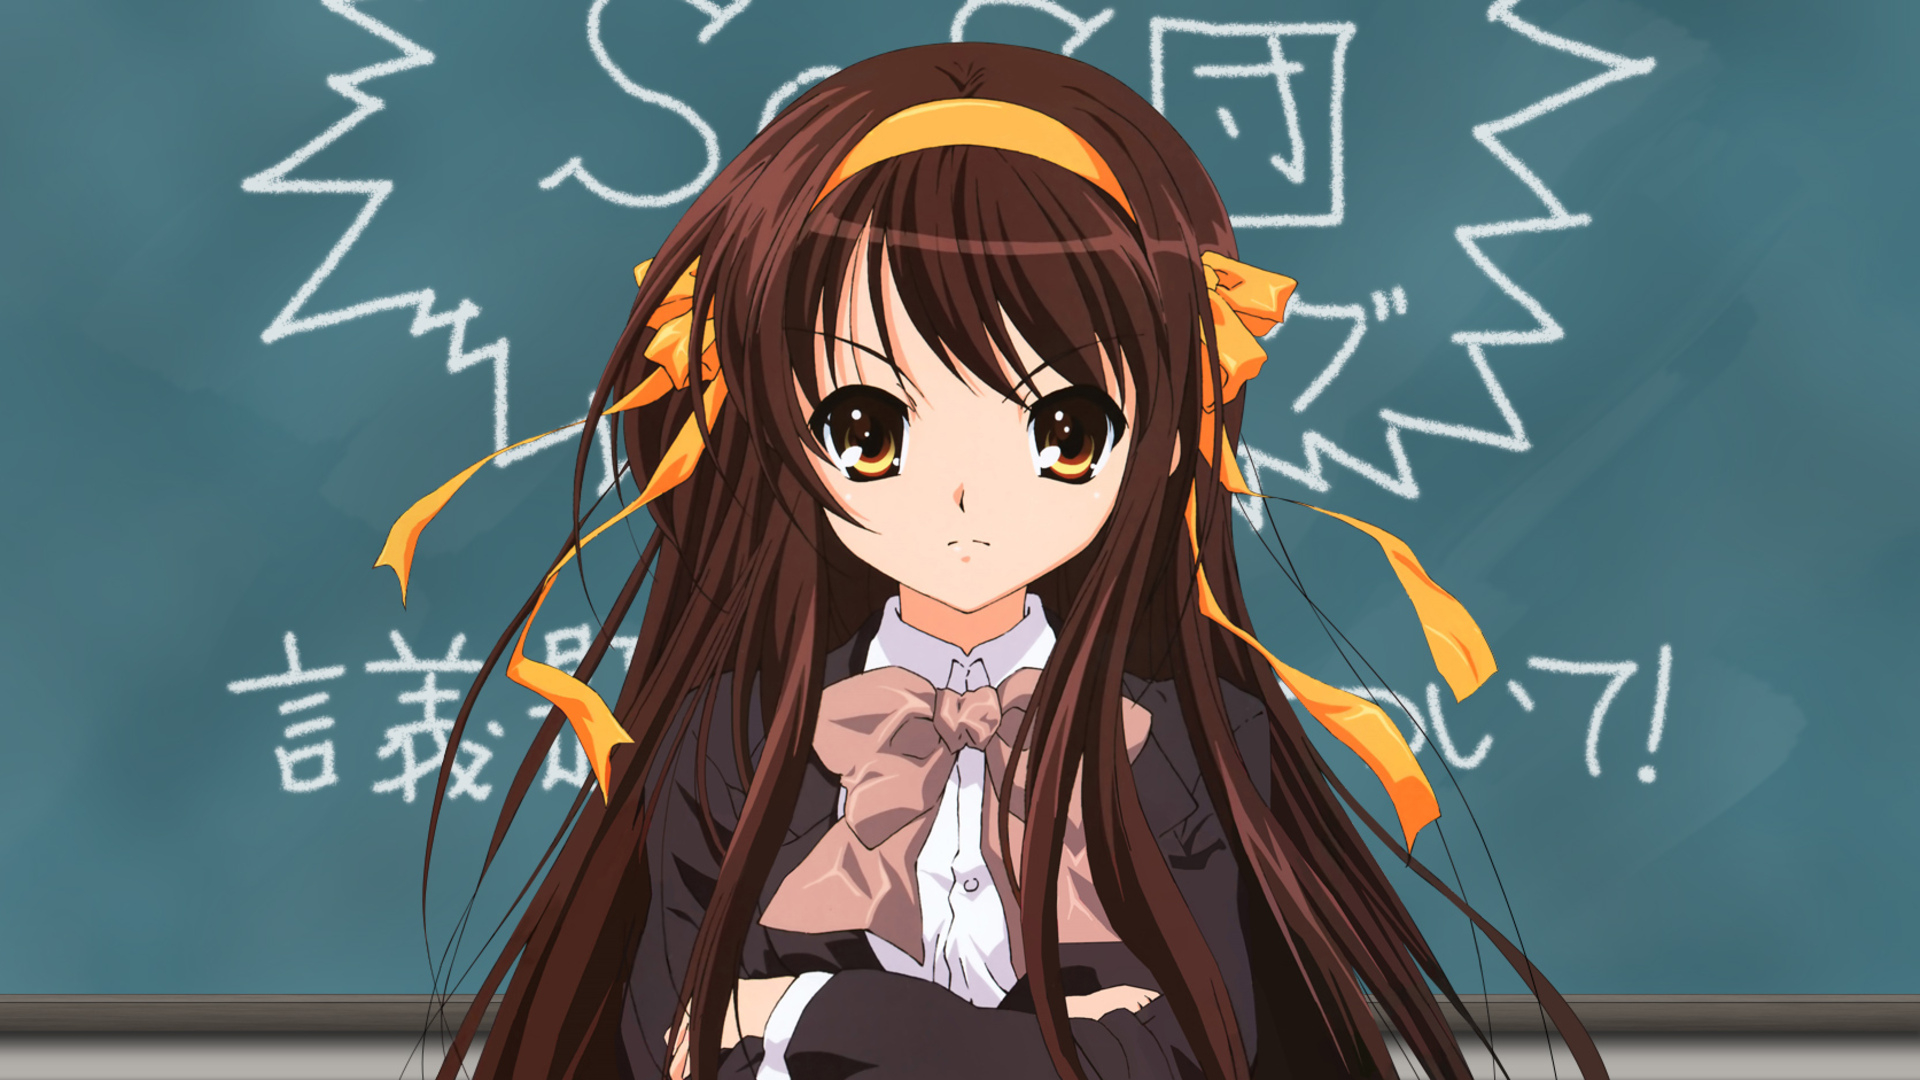 1920x1080 800+ The Melancholy Of Haruhi Suzumiya HD Wallpapers and Backgrounds